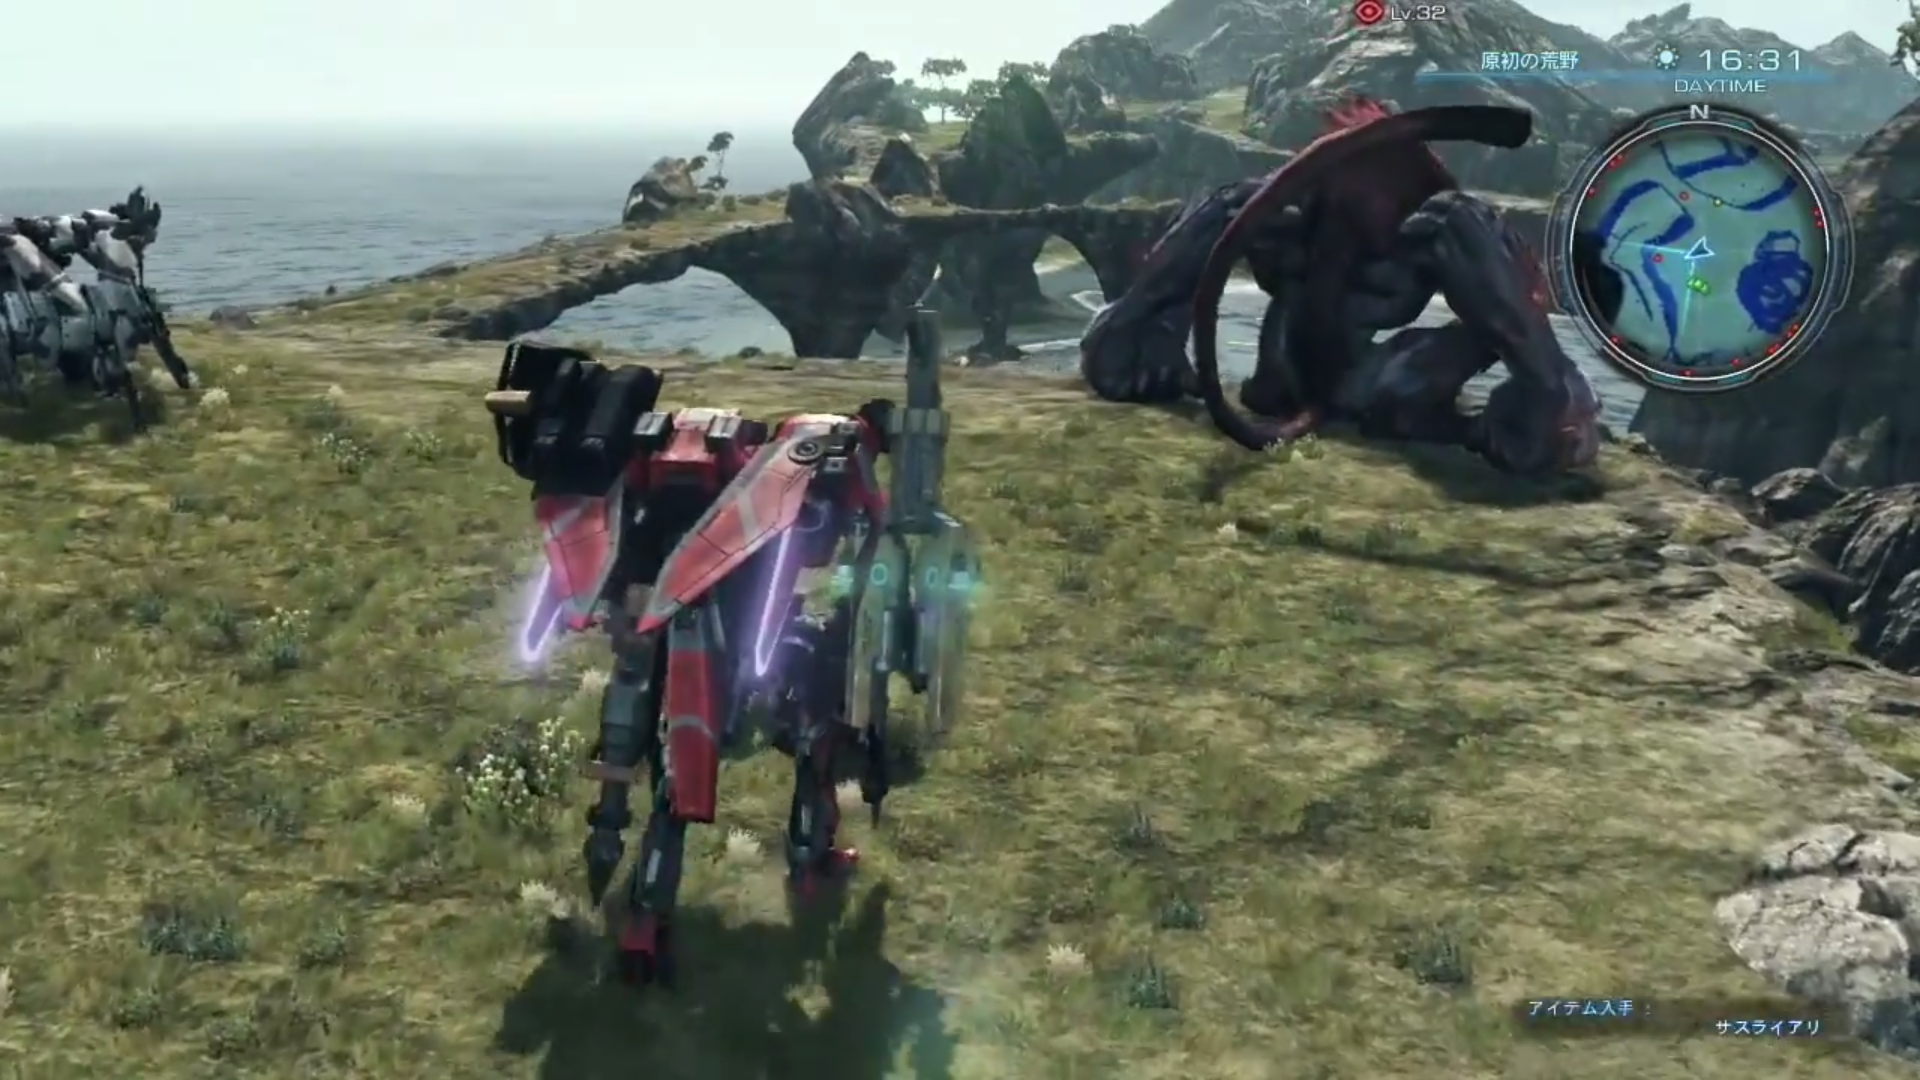 In-game Screen Shots of Monolith Soft’s Upcoming Title “X”